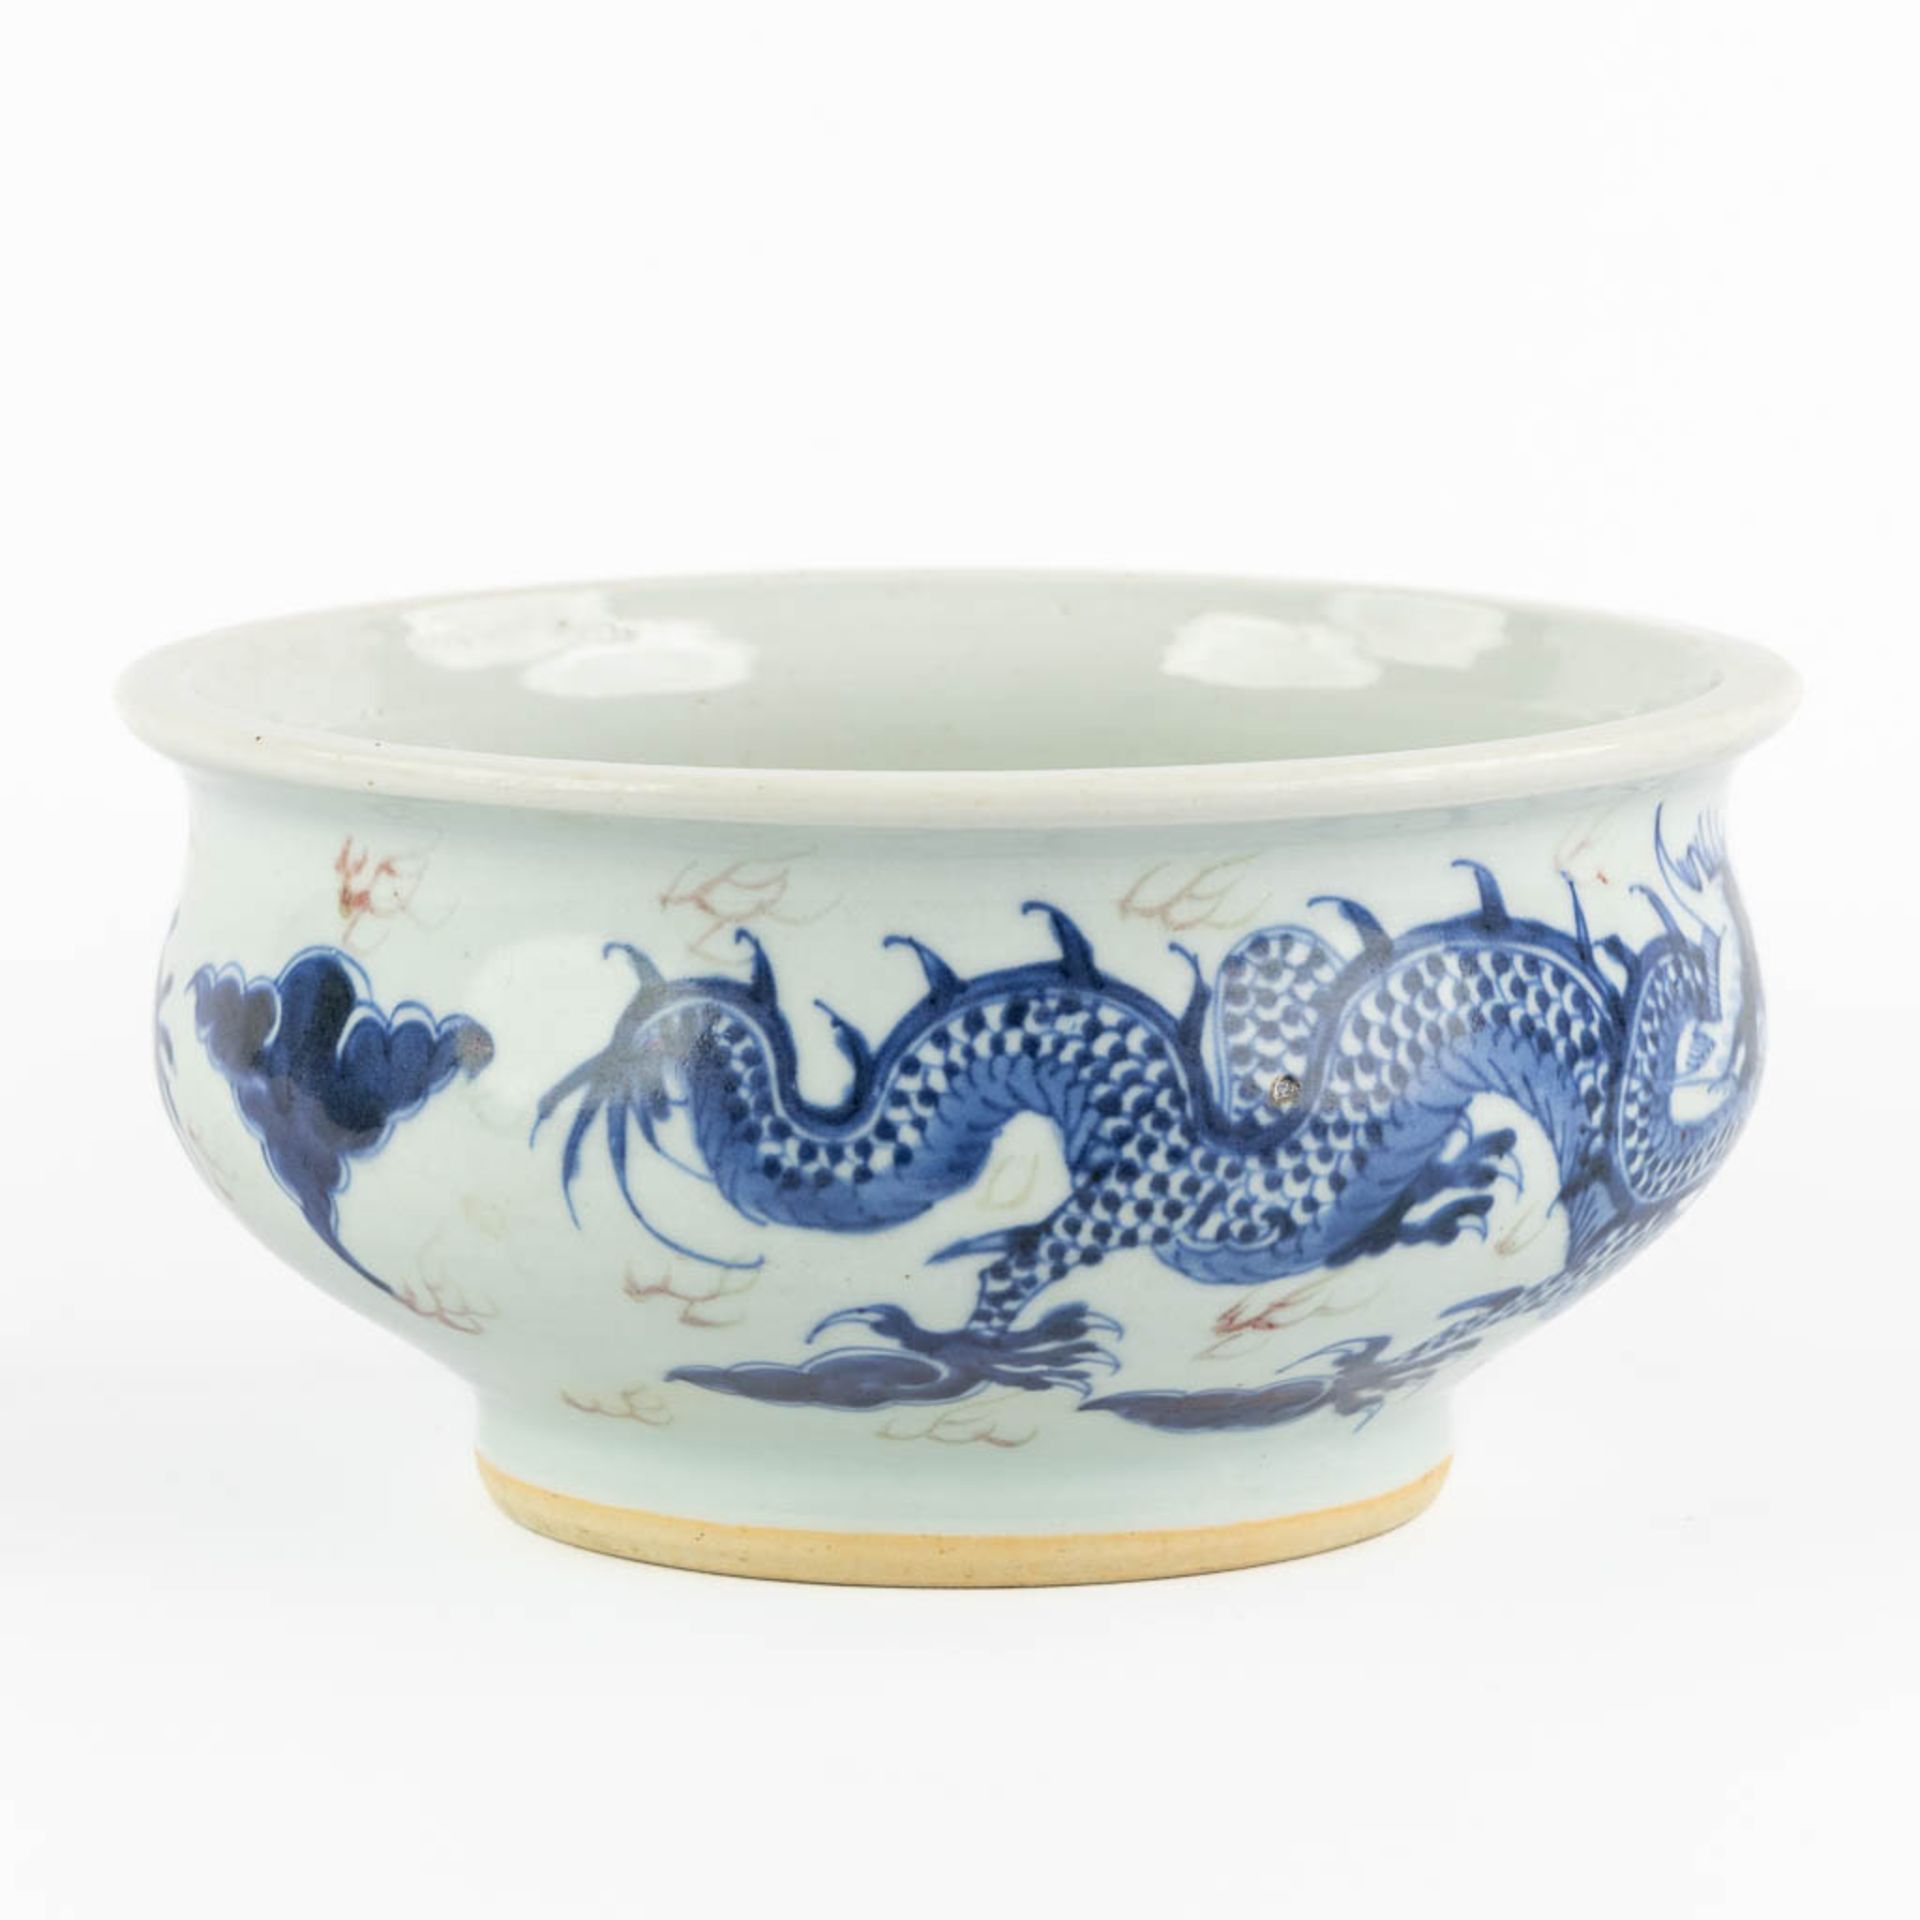 A Chinese cencer with a blue-white and red dragon decor. 19th C. (H:11 x D:21,5 cm) - Image 4 of 11